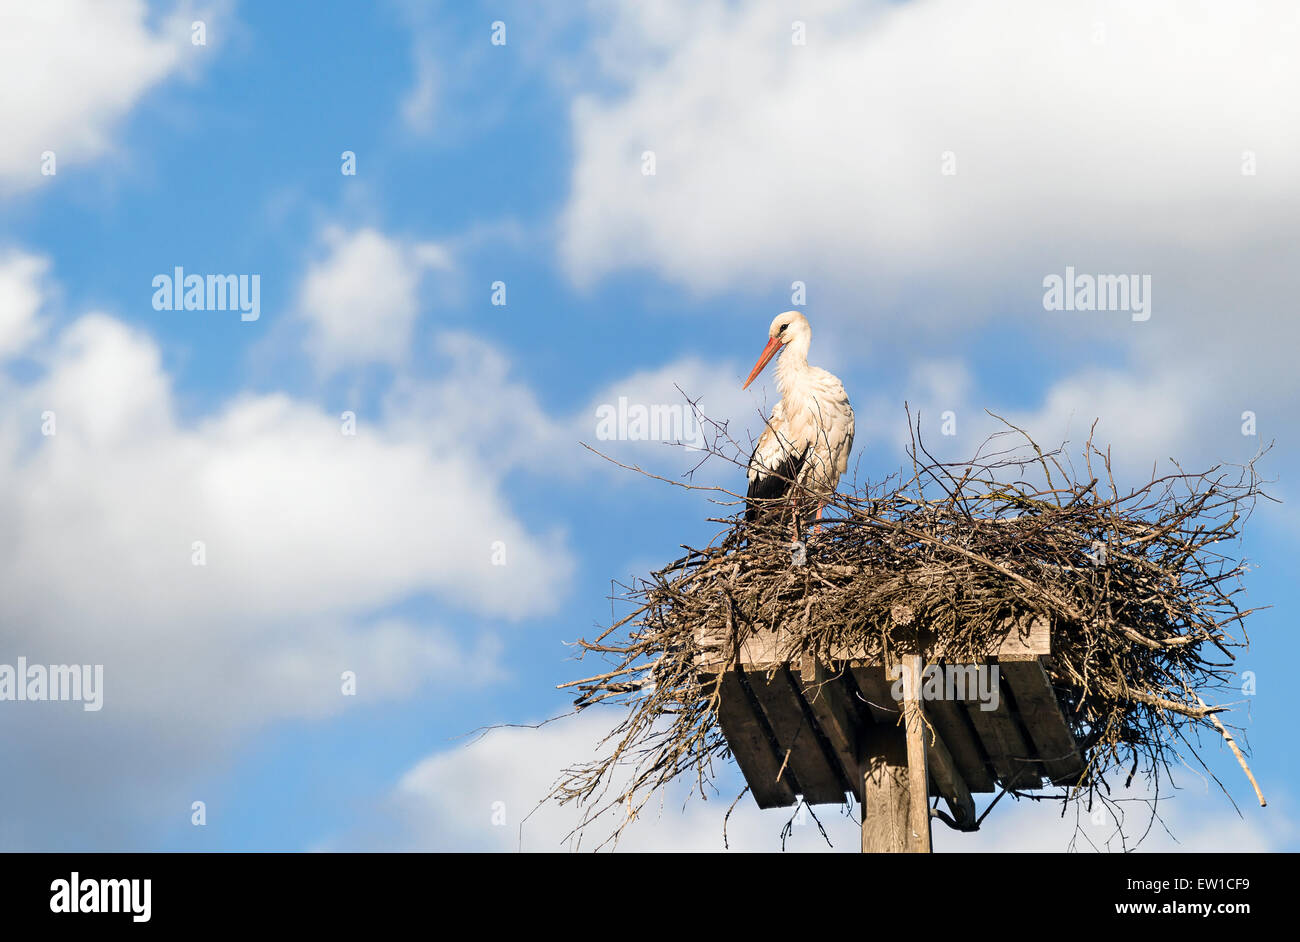 White Stork (Ciconia ciconia) standing on the nest, blue sky and white clouds in the background Stock Photo